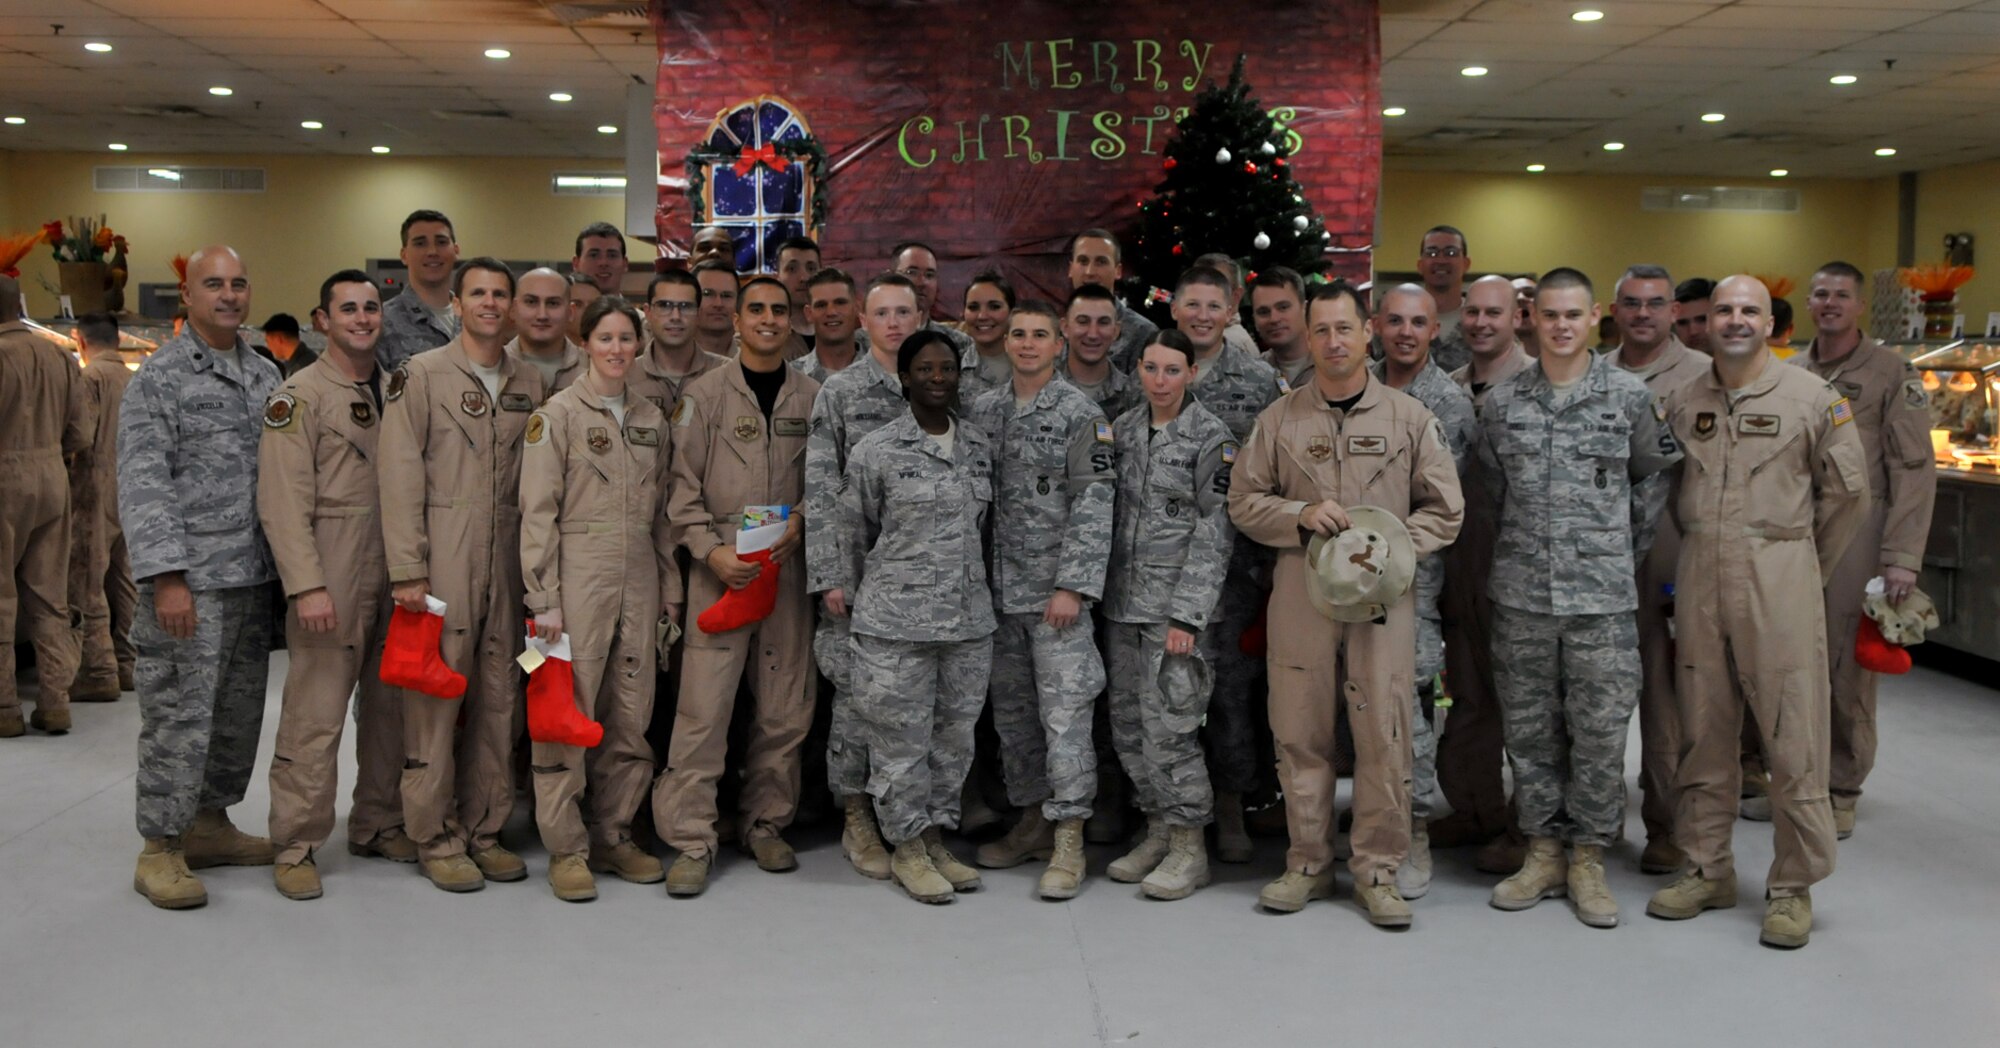 SOUTHWEST ASIA -- Col. Chad Manske, 100th Air Refueling Wing commander, and Chaplain (Lt. Col.) Frederick Viccellio, met with members of the 100th ARW deployed to the Middle East during a holiday visit Dec. 18.  The colonels took stockings full of gifts provided by the RAF Mildenhall chapel's Single Airman's Ministry and various volunteers. (U.S. Air Force photo by Staff Sgt. Austin M. May)